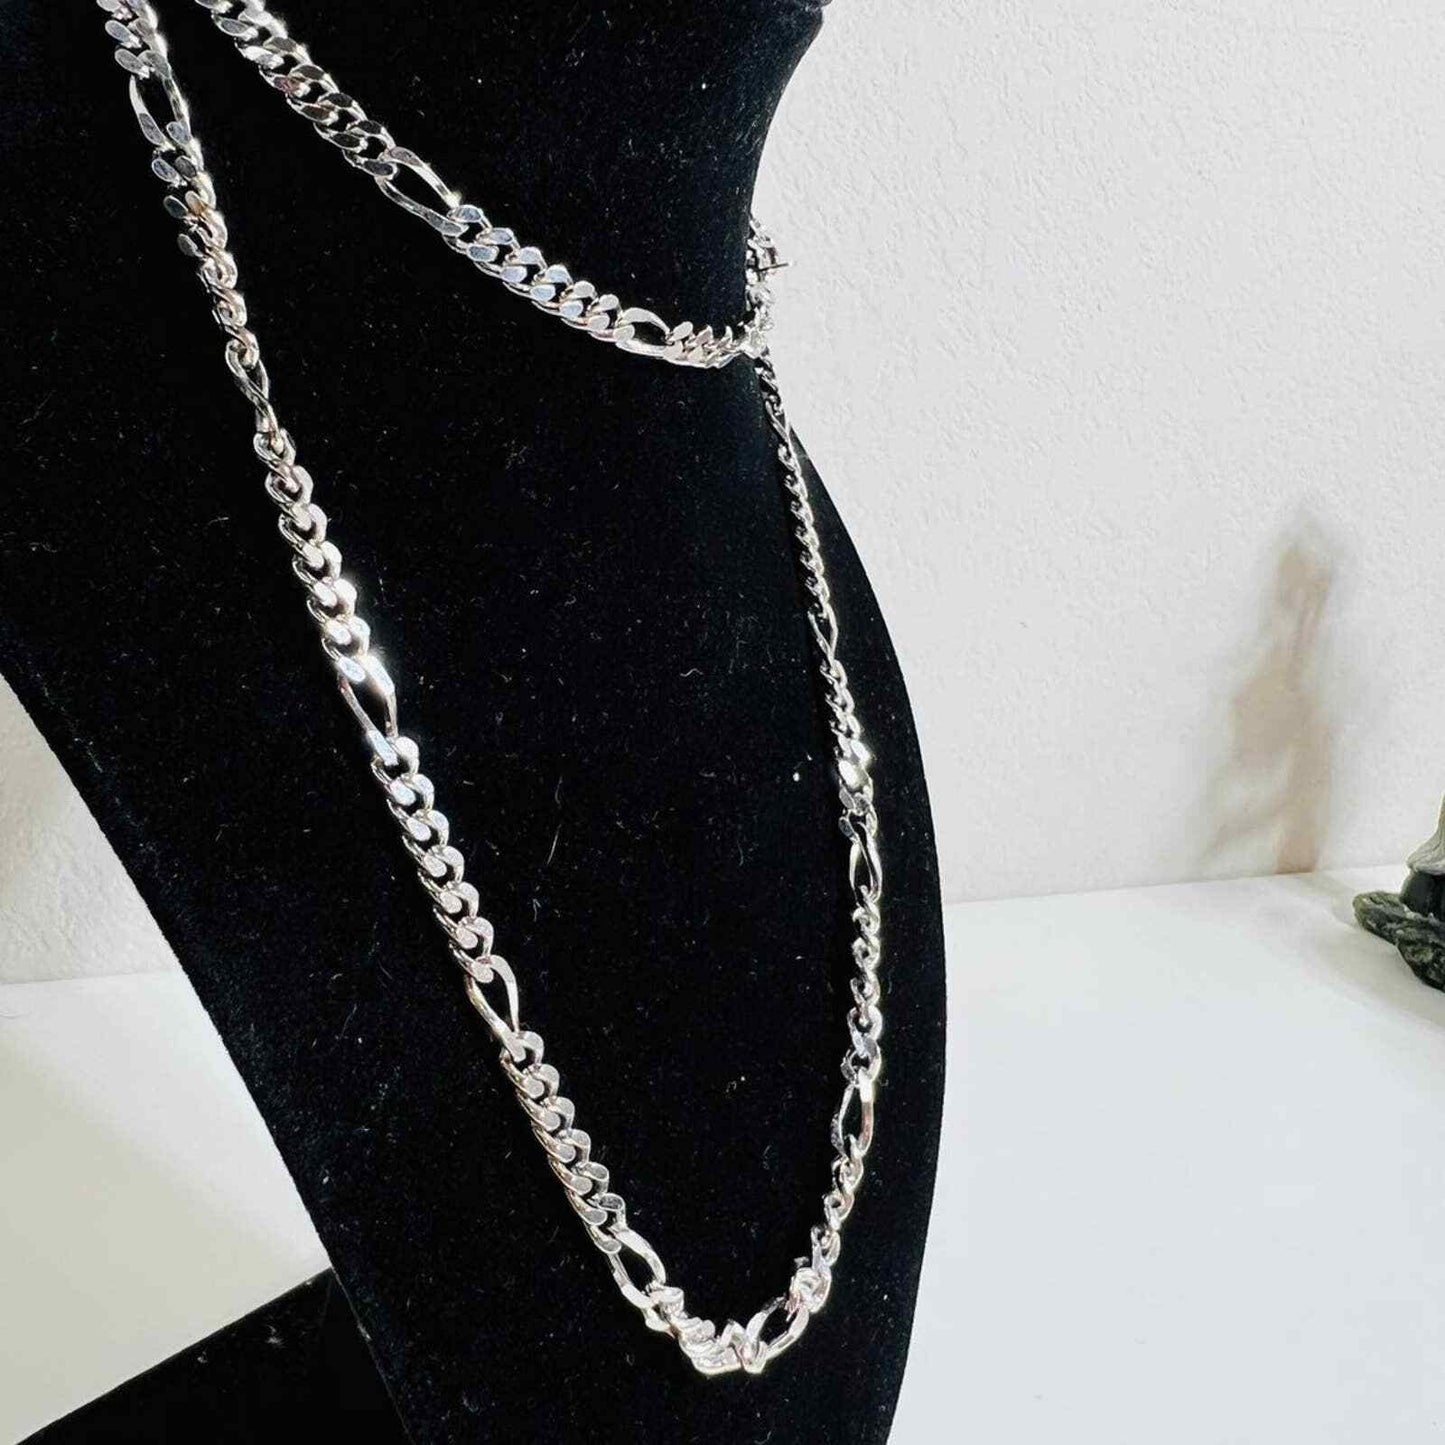 Monet Necklace Figaro Silver Tone Chain 30" Long Fashion Jewelry Woman Costume